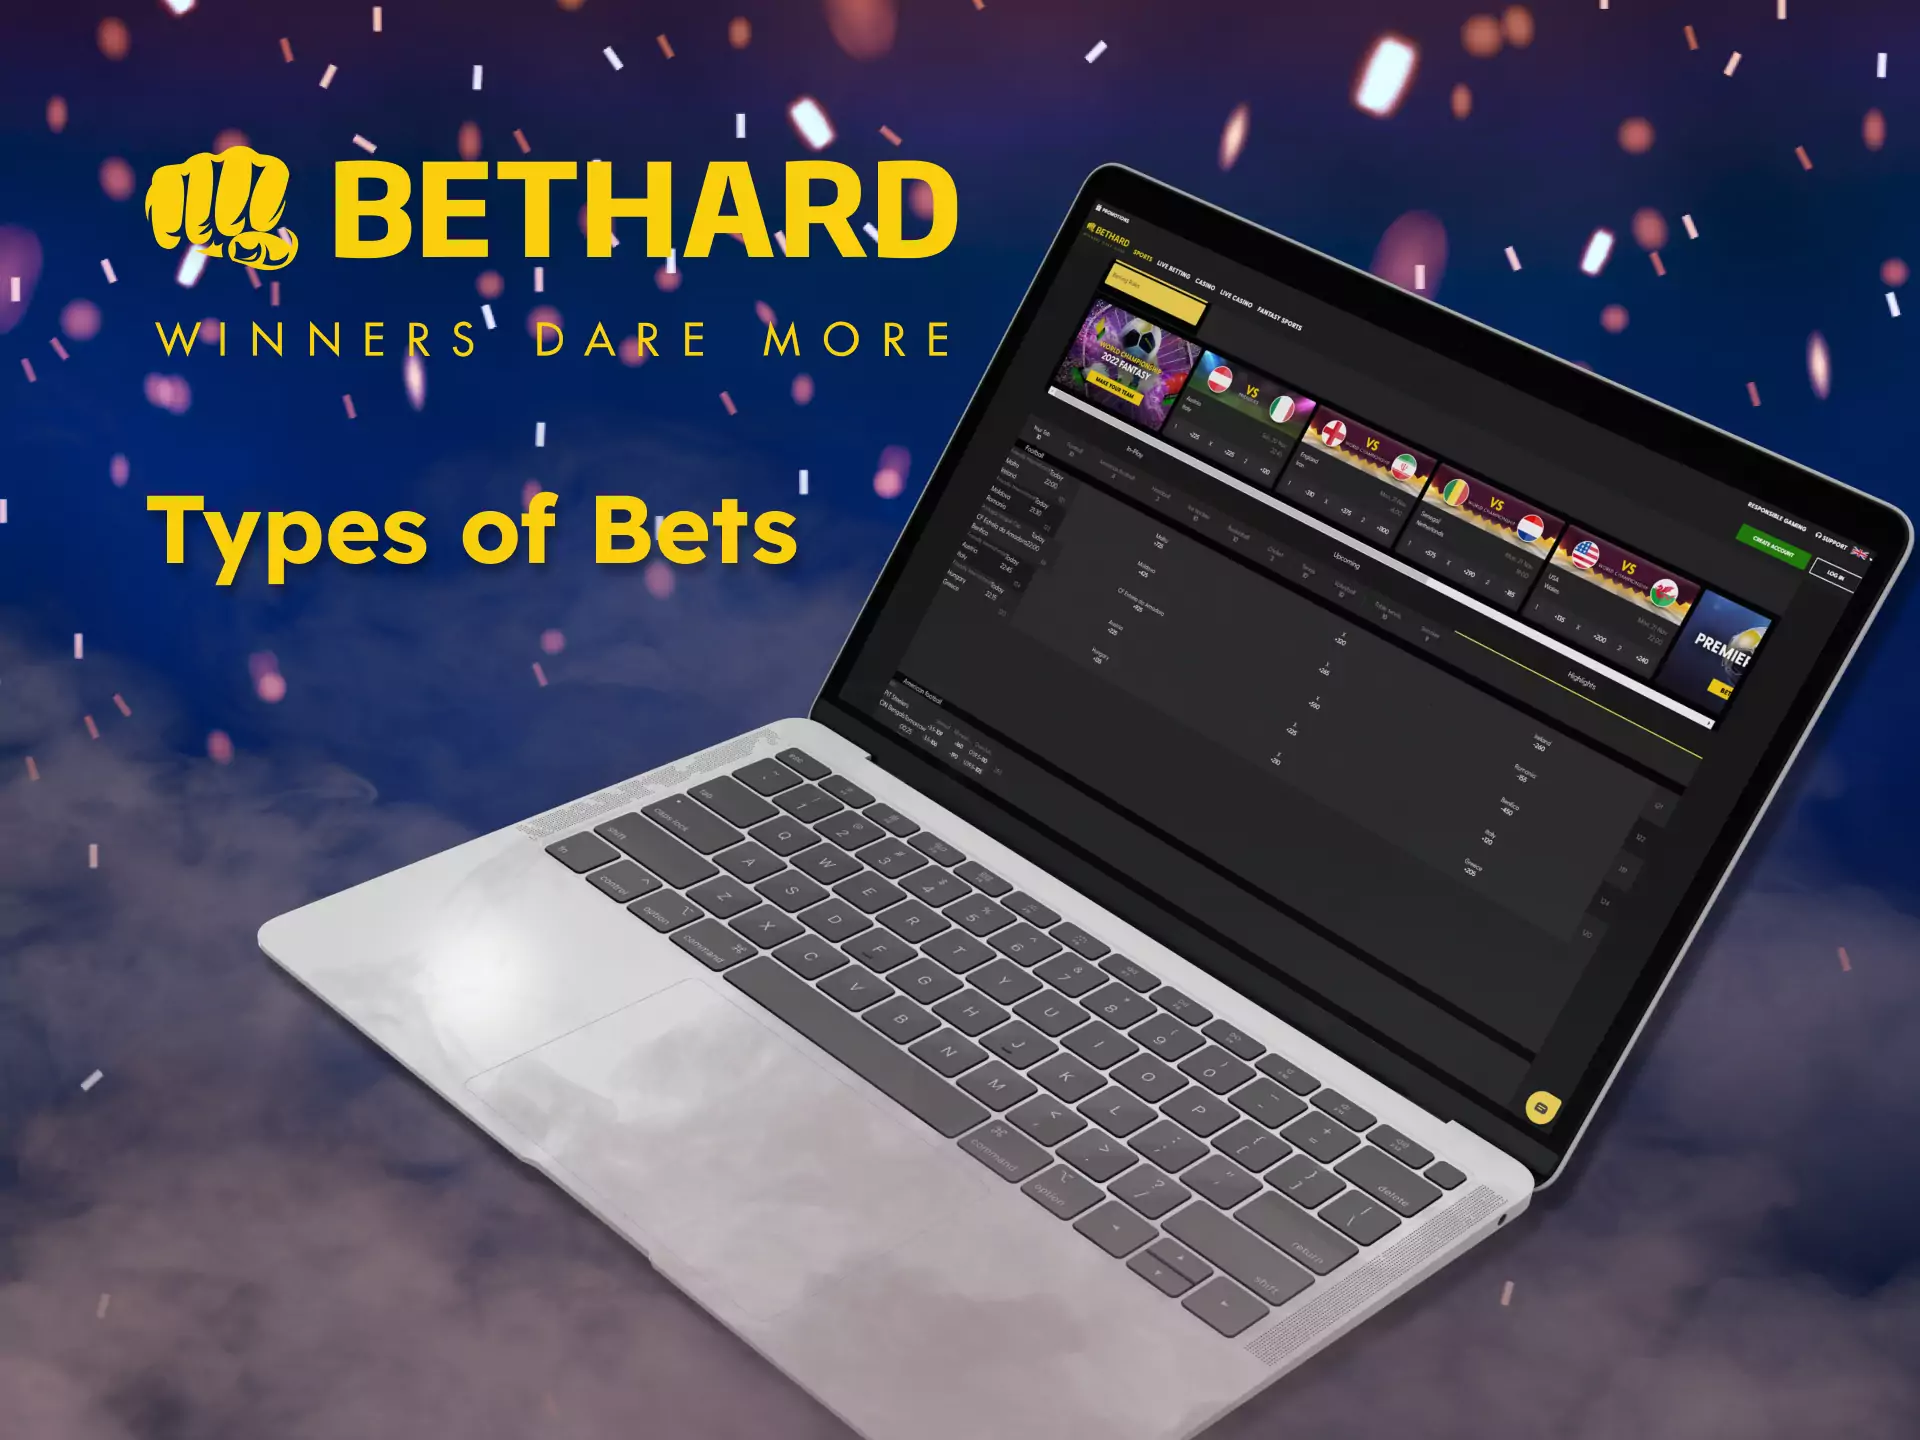 You will find a suitable and convenient bet type on Bethard.